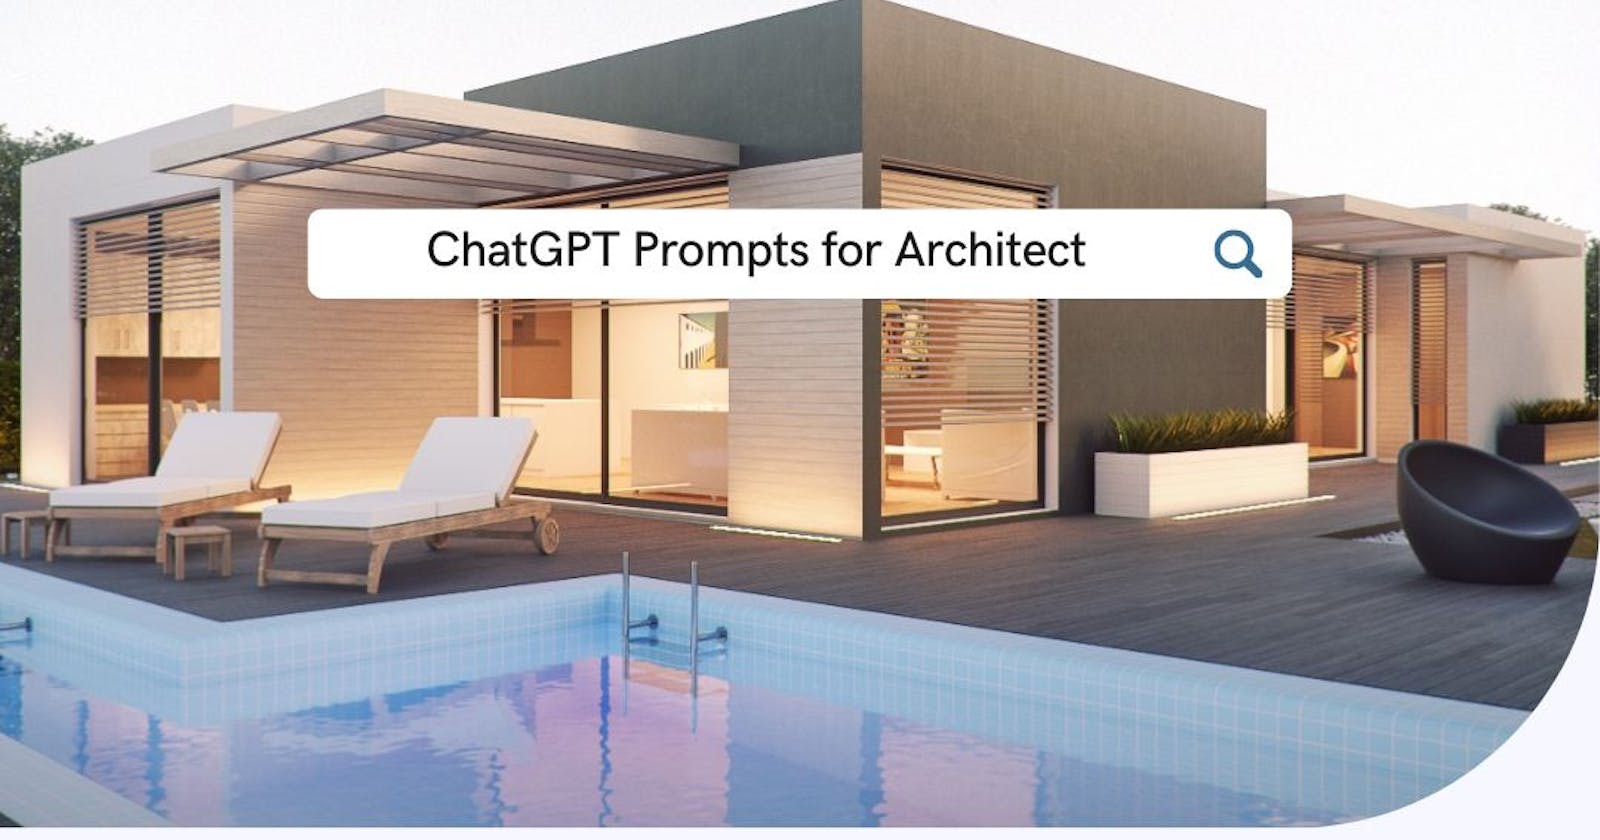 ChatGPT Prompts for Architects